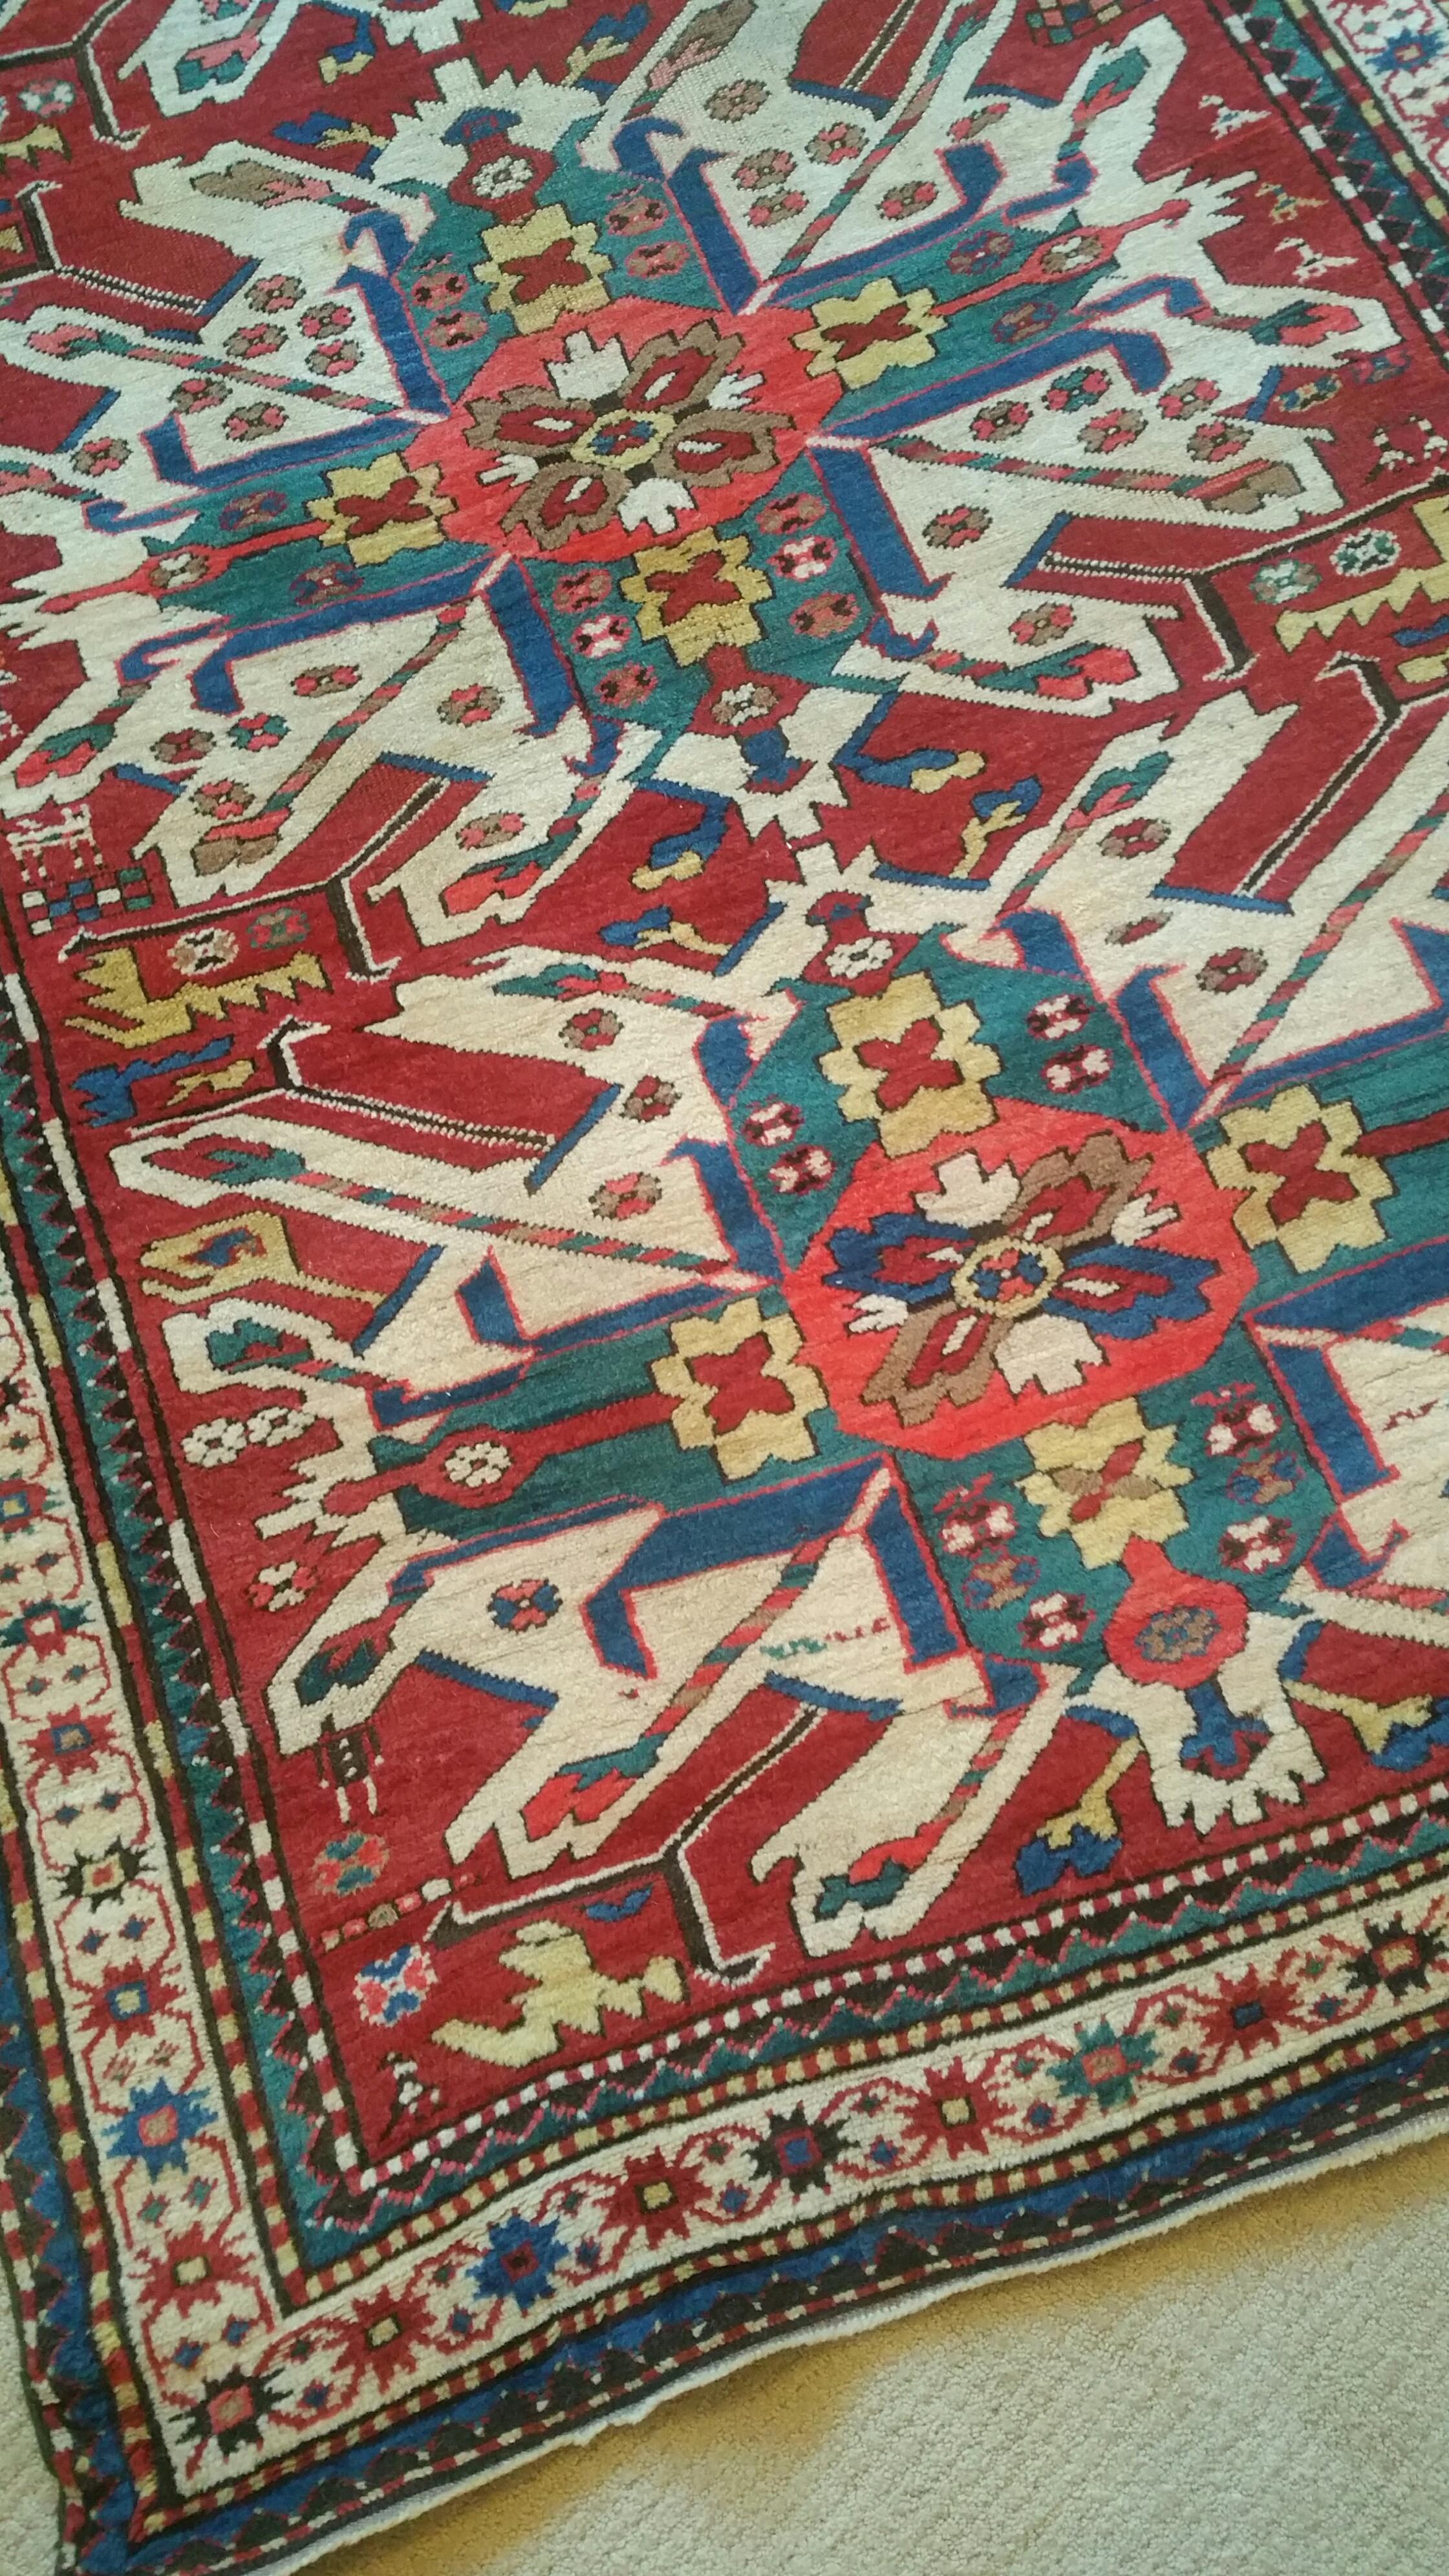 Date of origin Caucasus this beautiful late 19th century Eagle Kazak Chelaberd wool carpet has wonderful colors and sunburst detailing. Wool, hand-knotted, vegetable dye colors and many interesting details, circa 1870. Sole collector proprietor